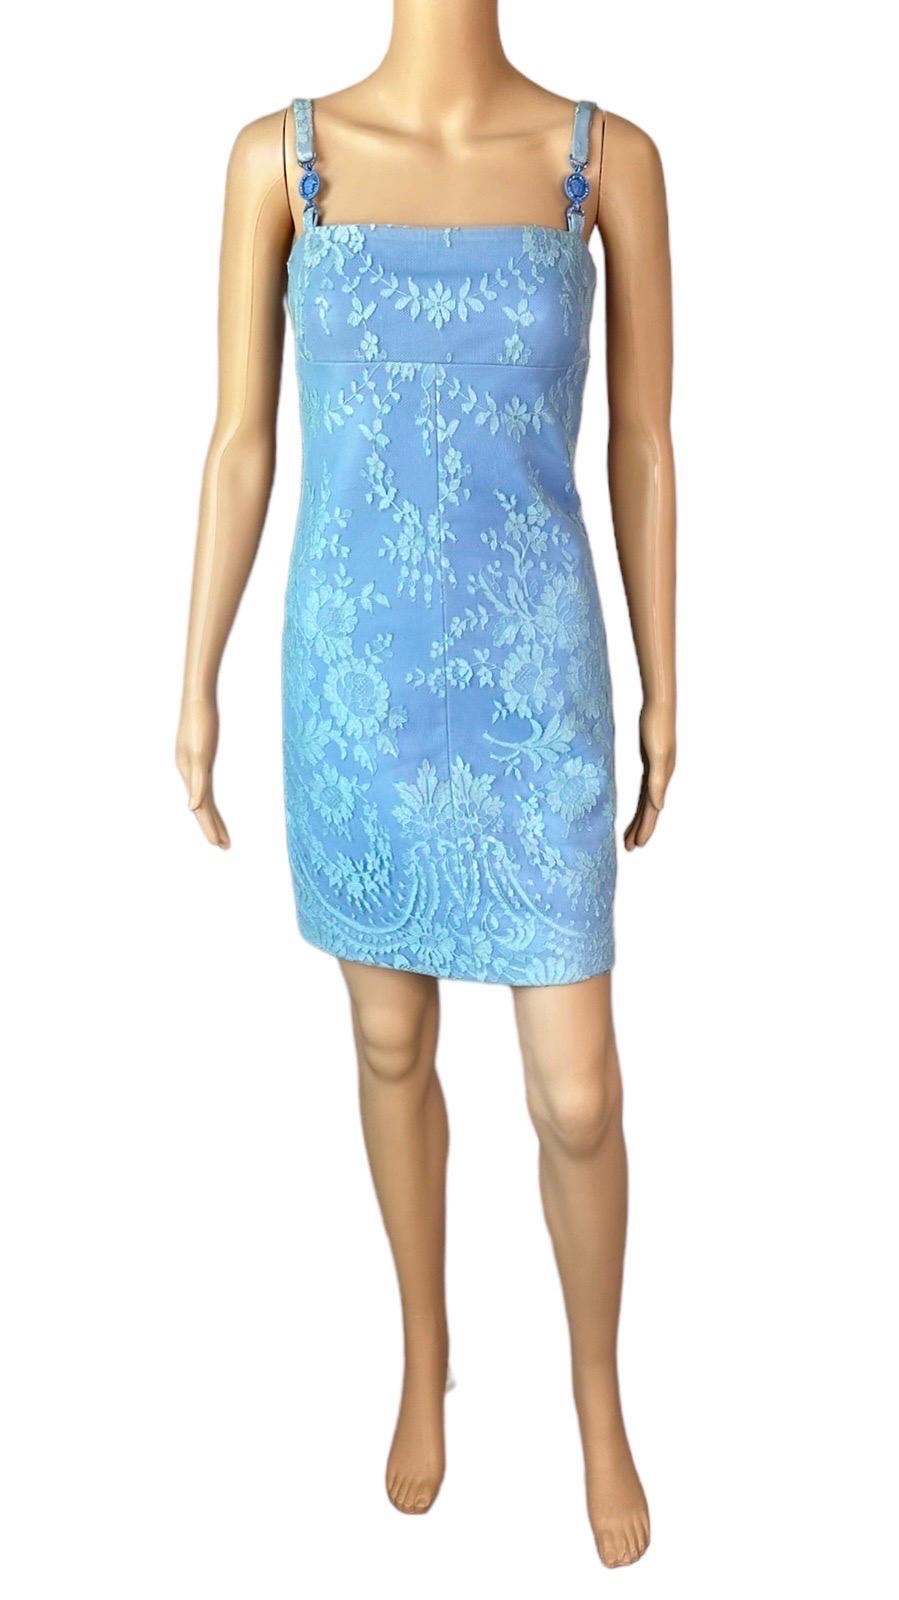 Gianni Versace F/W 1996 Vintage Floral Lace and Leather Blue Mini Dress  1